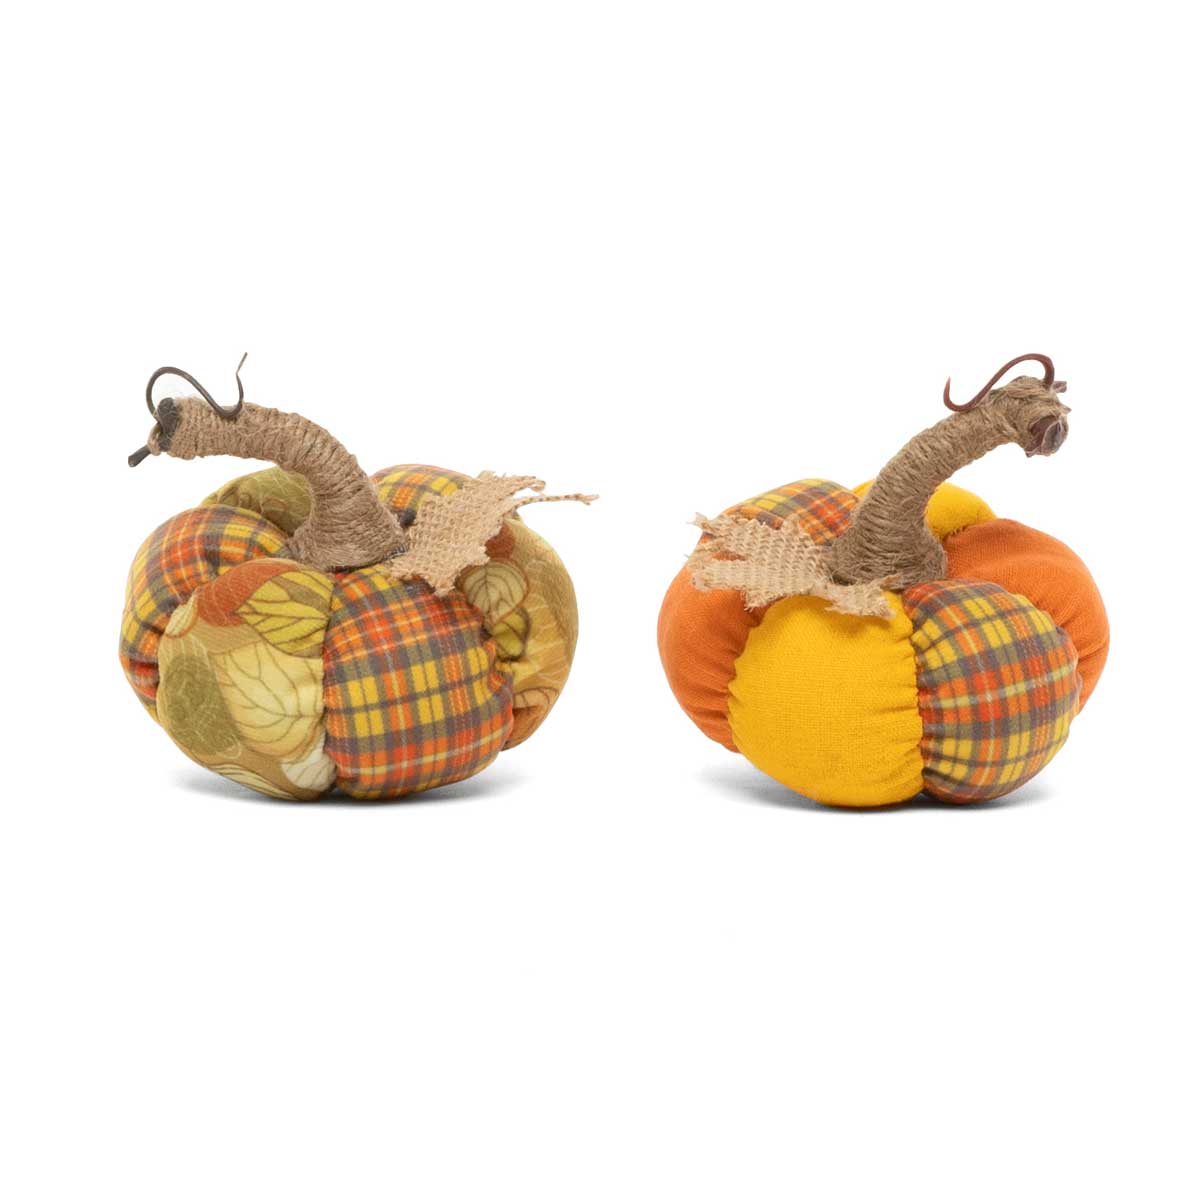 PLUSH PUMPKIN 2 ASSORTED SMALL 4IN X 3.5IN WITH 1IN STEM